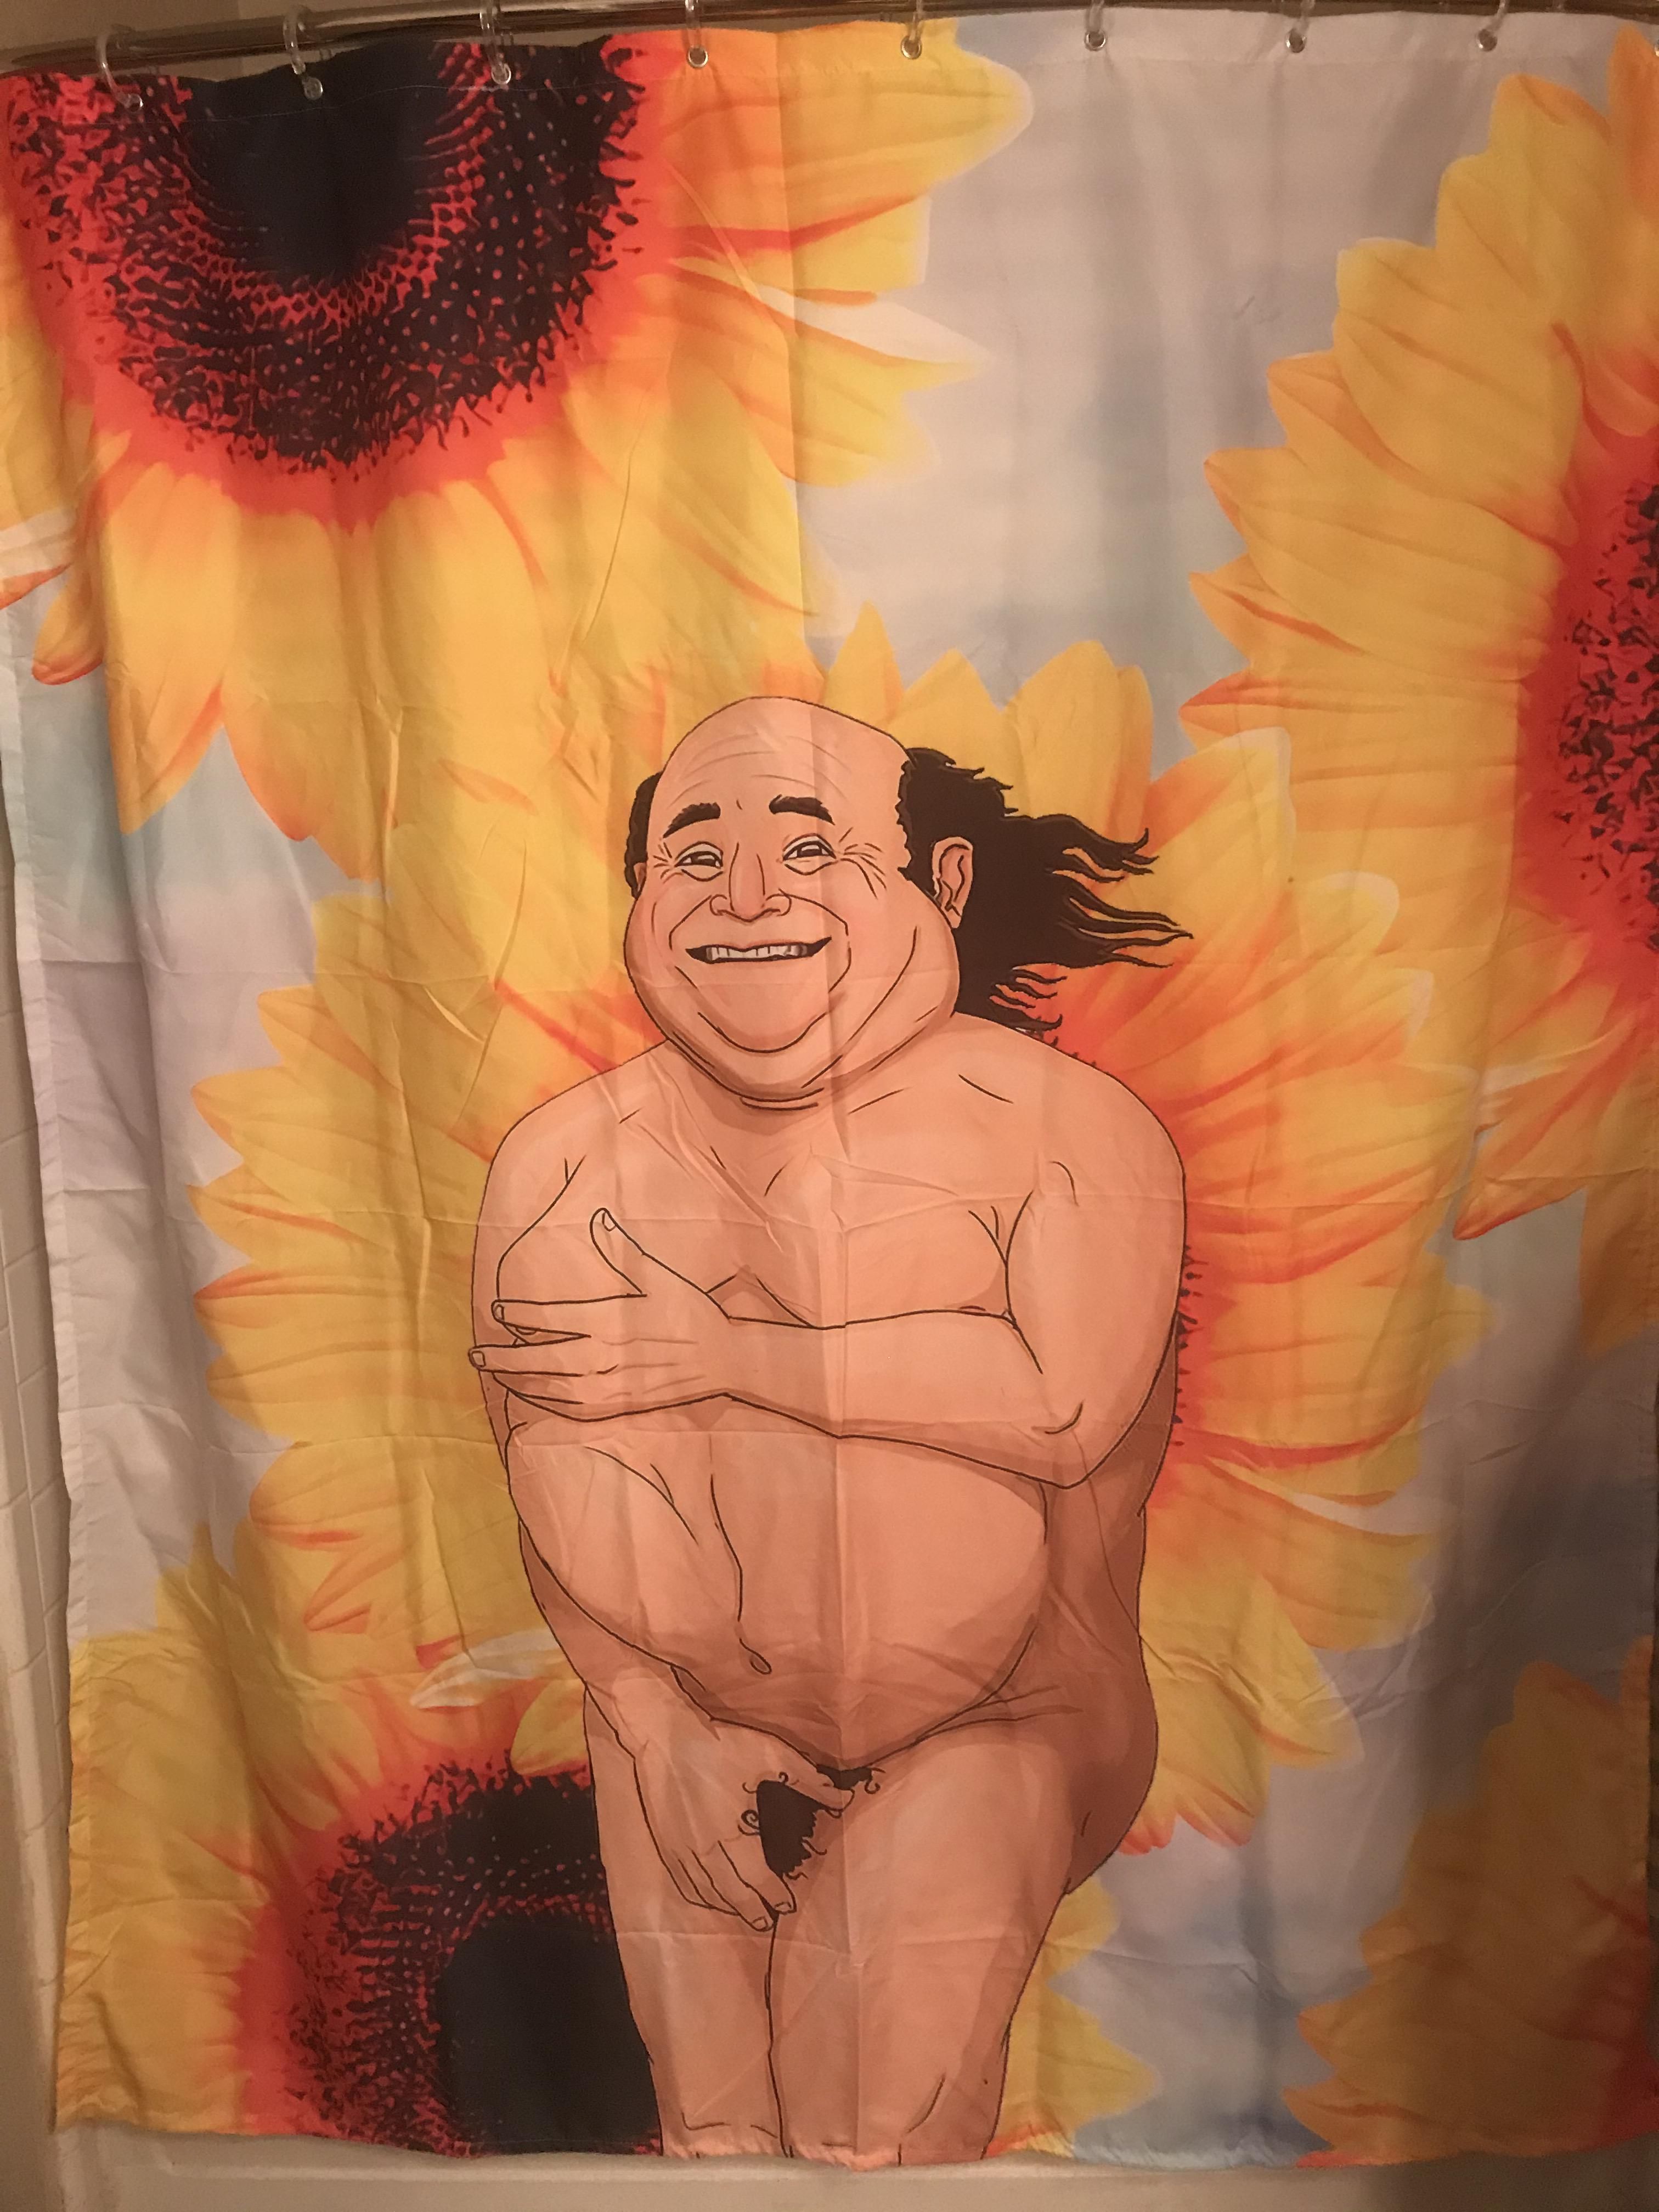 My Gf’s favorite flower is the Sunflower. So for her birthday I ordered this Danny Devito Sunflower special.